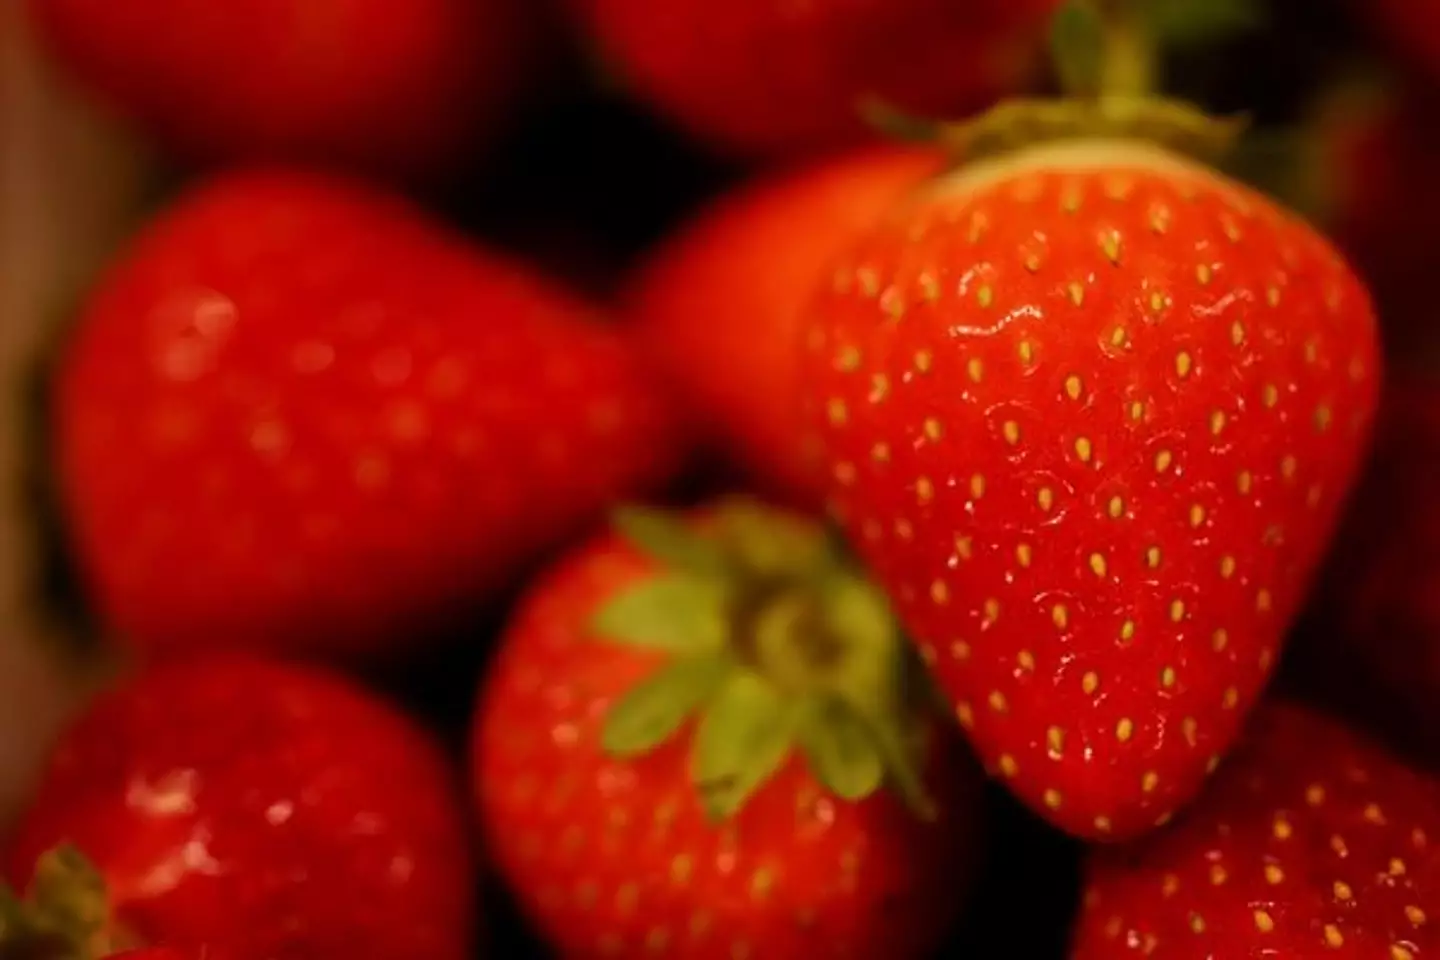 Strawberries have several health benefits and can help to prevent dementia and depression in middle-age.